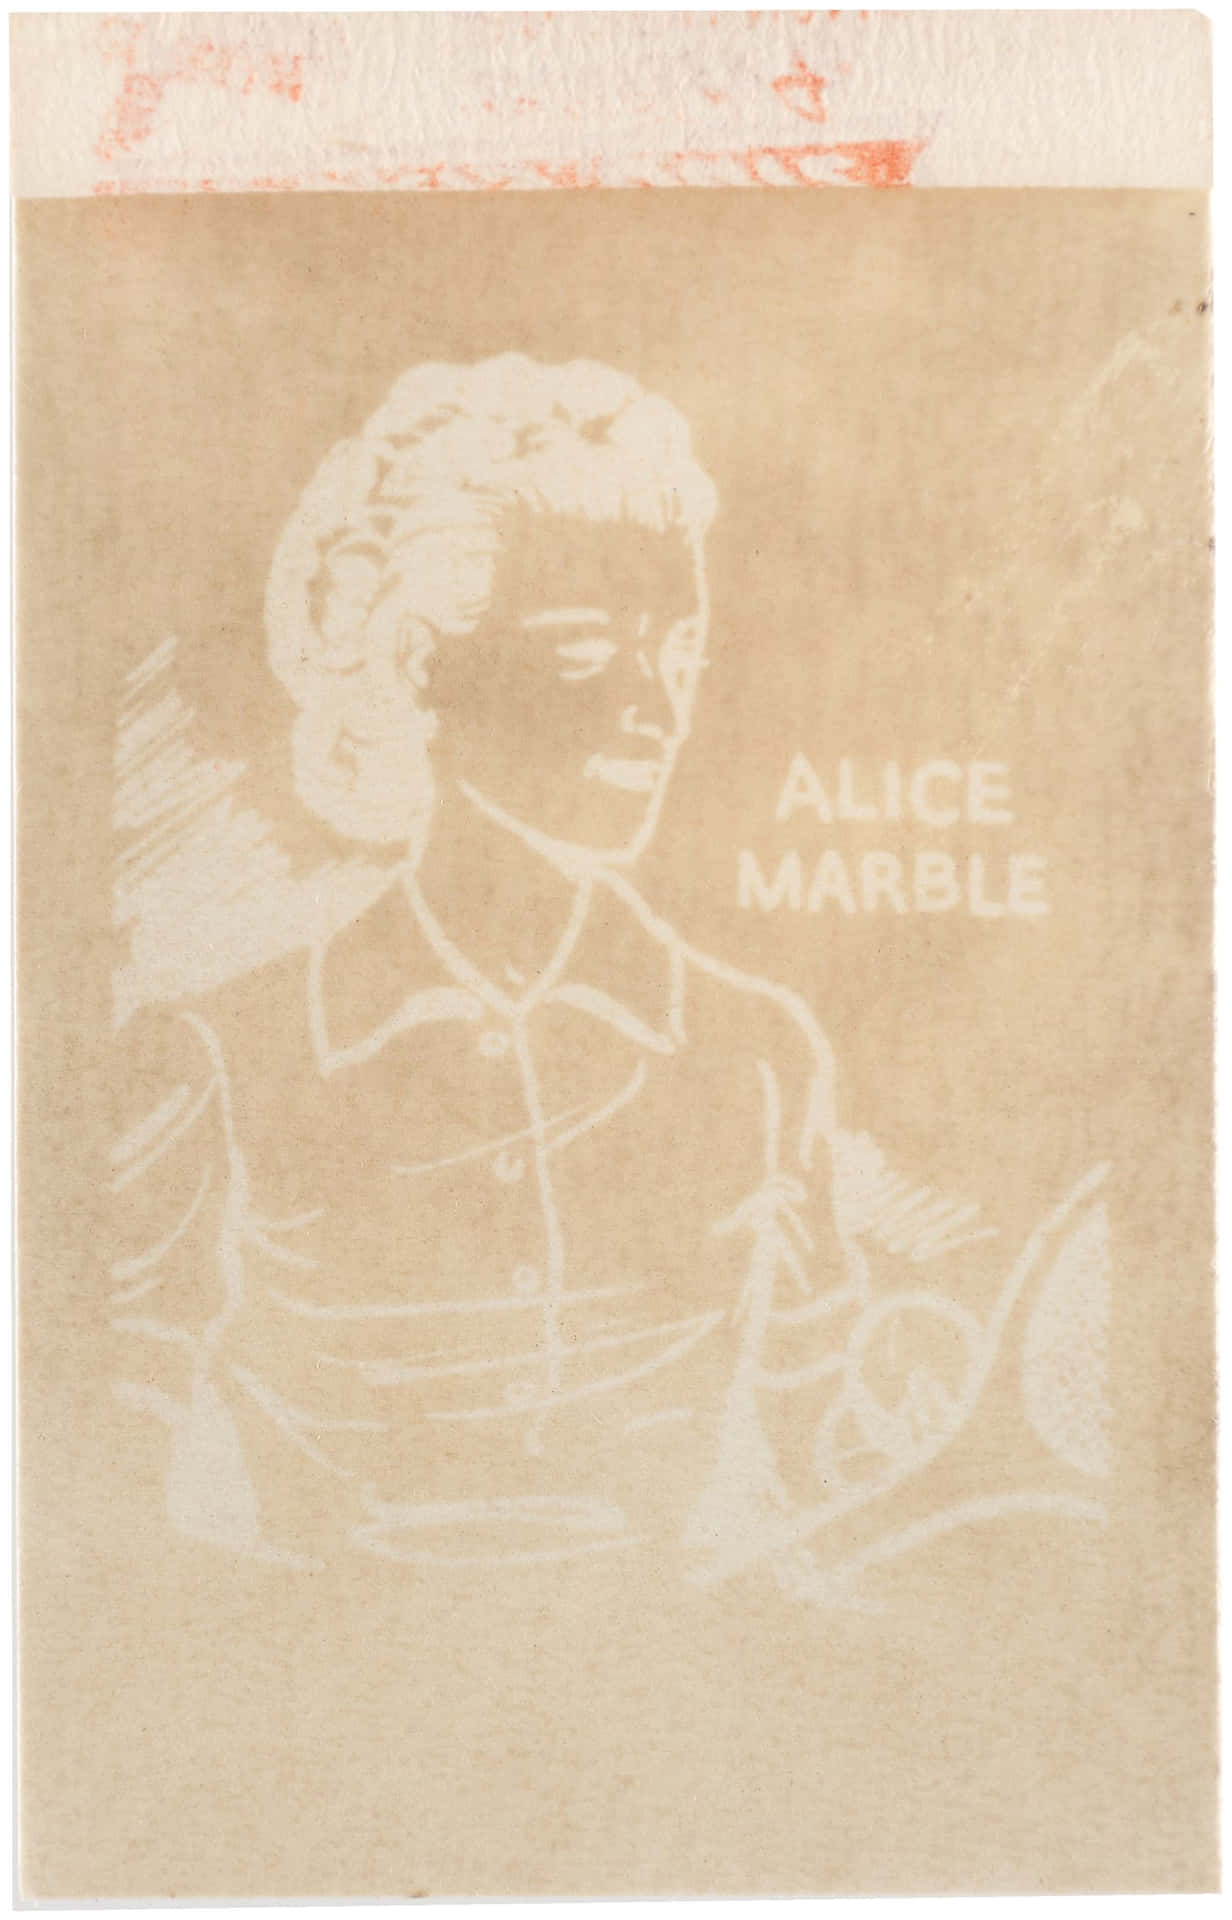 Portrait of Iconic American Tennis Player Alice Marble Wallpaper